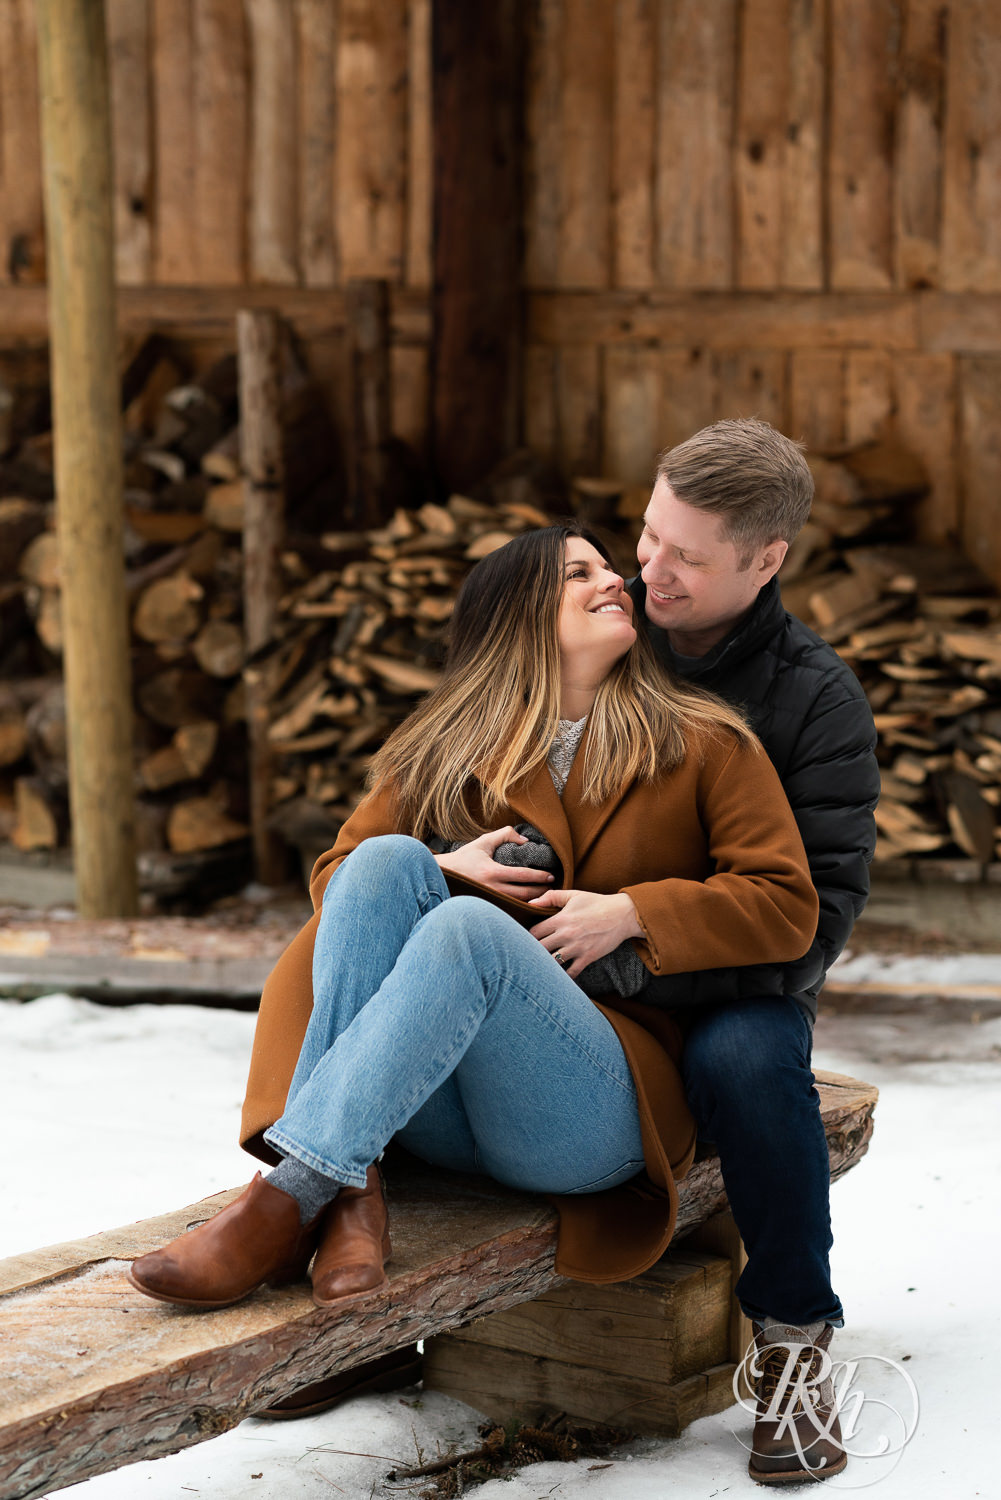 Man and woman sitting in front of woodpile in the snow at Hansen Tree Farm in Anoka, Minnesota.